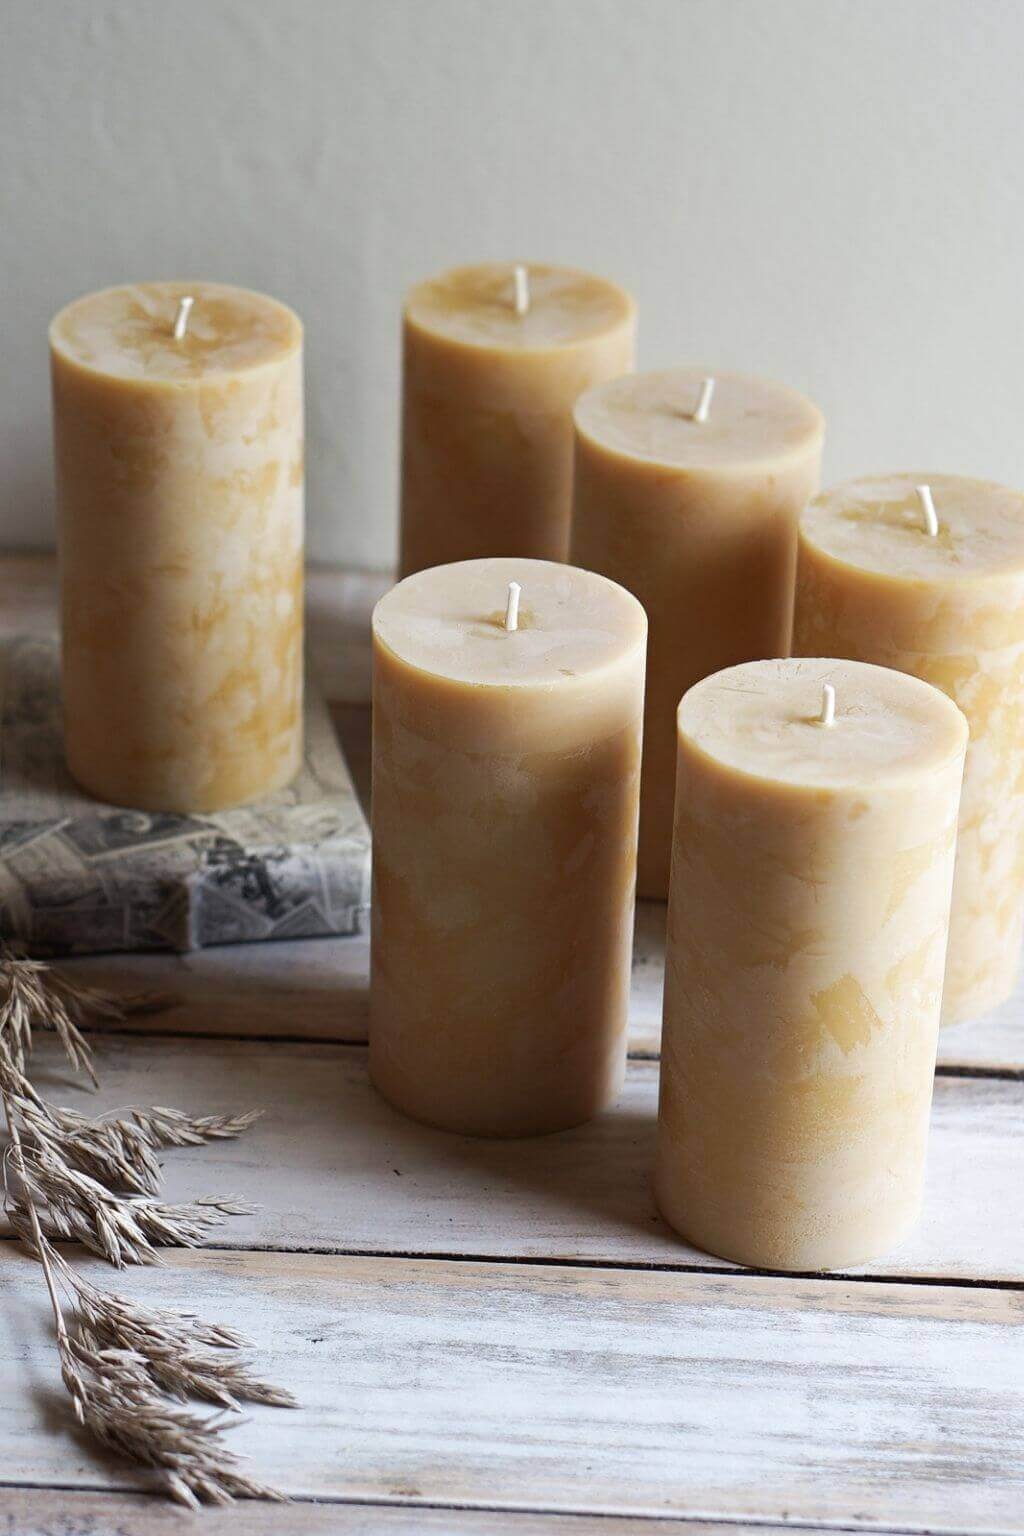 Pure Beeswax Candle - 100% Pure Beeswax